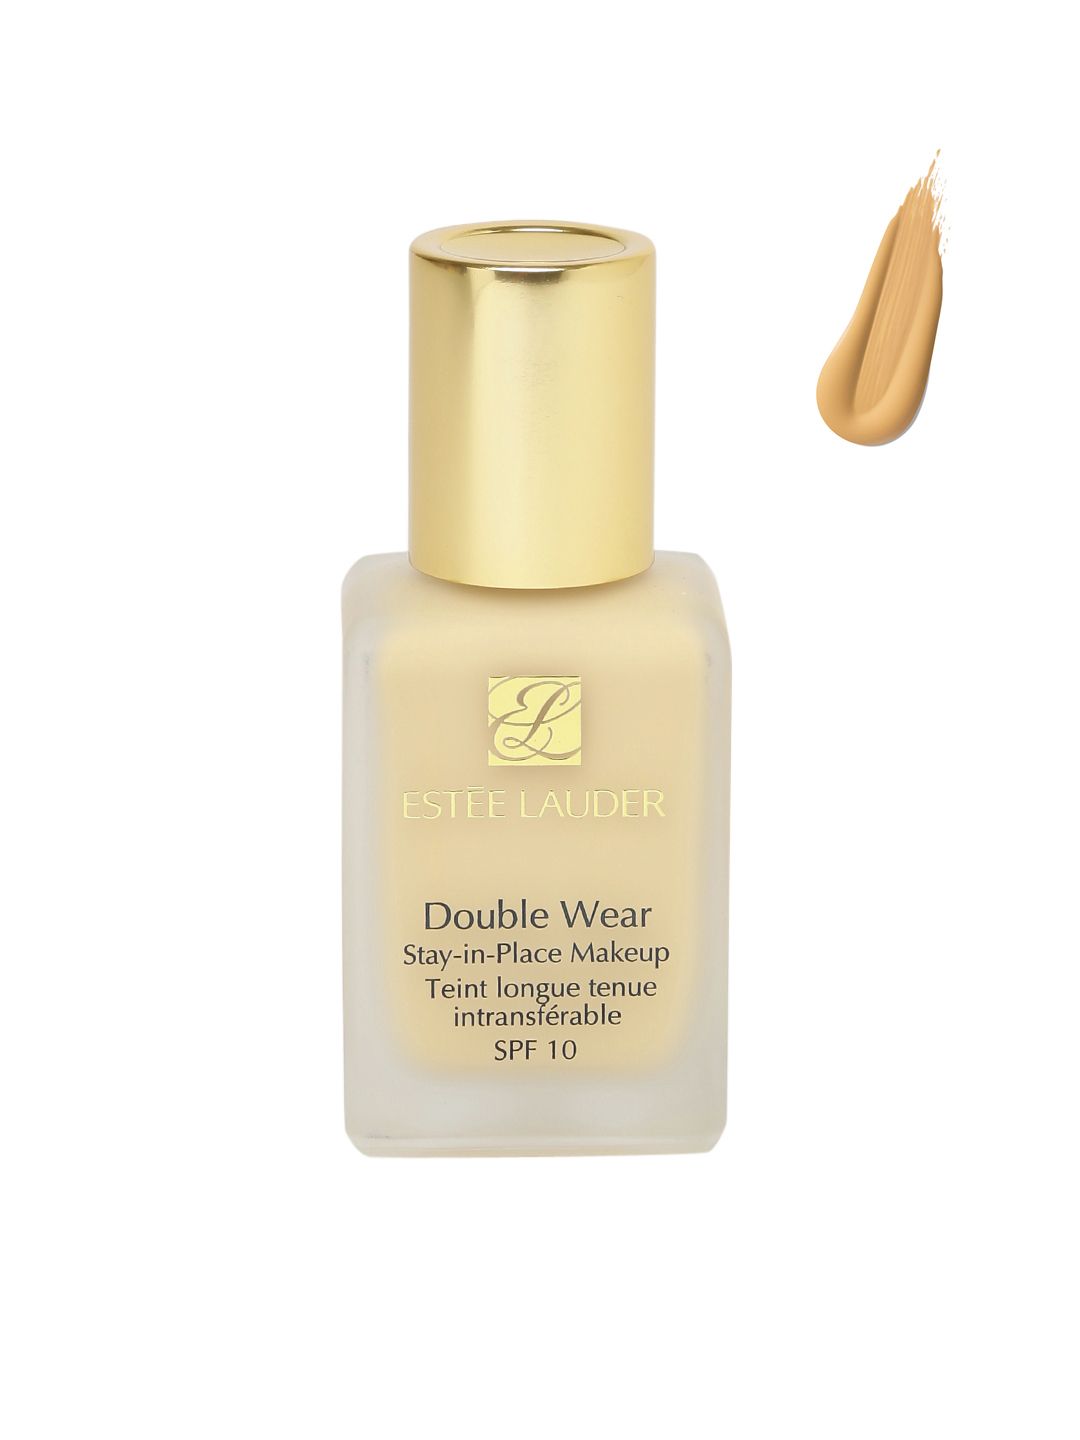 Estee Lauder Double Wear Stay-in-Place Makeup SPF 10 Foundation - Bone 30 ml Price in India